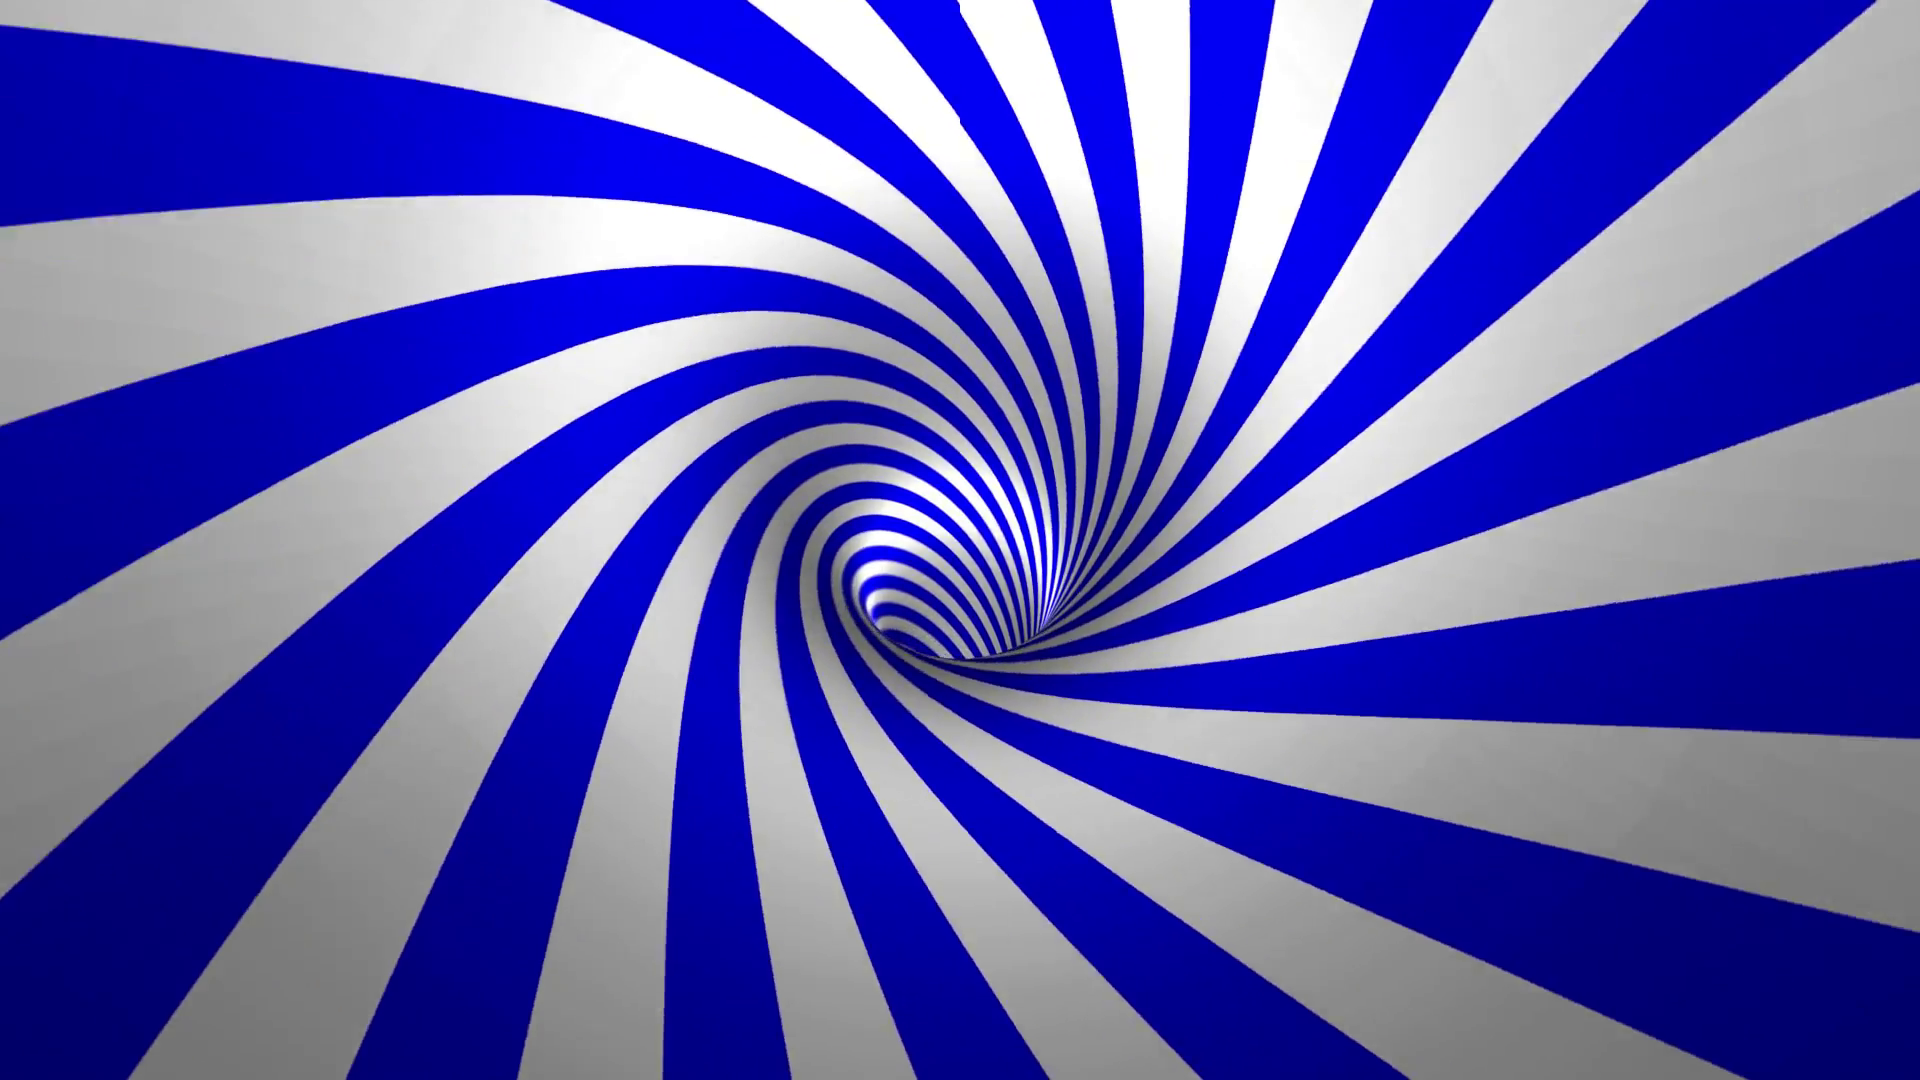 Hypnotic spiral , blue and white background in 3D Motion Background ...